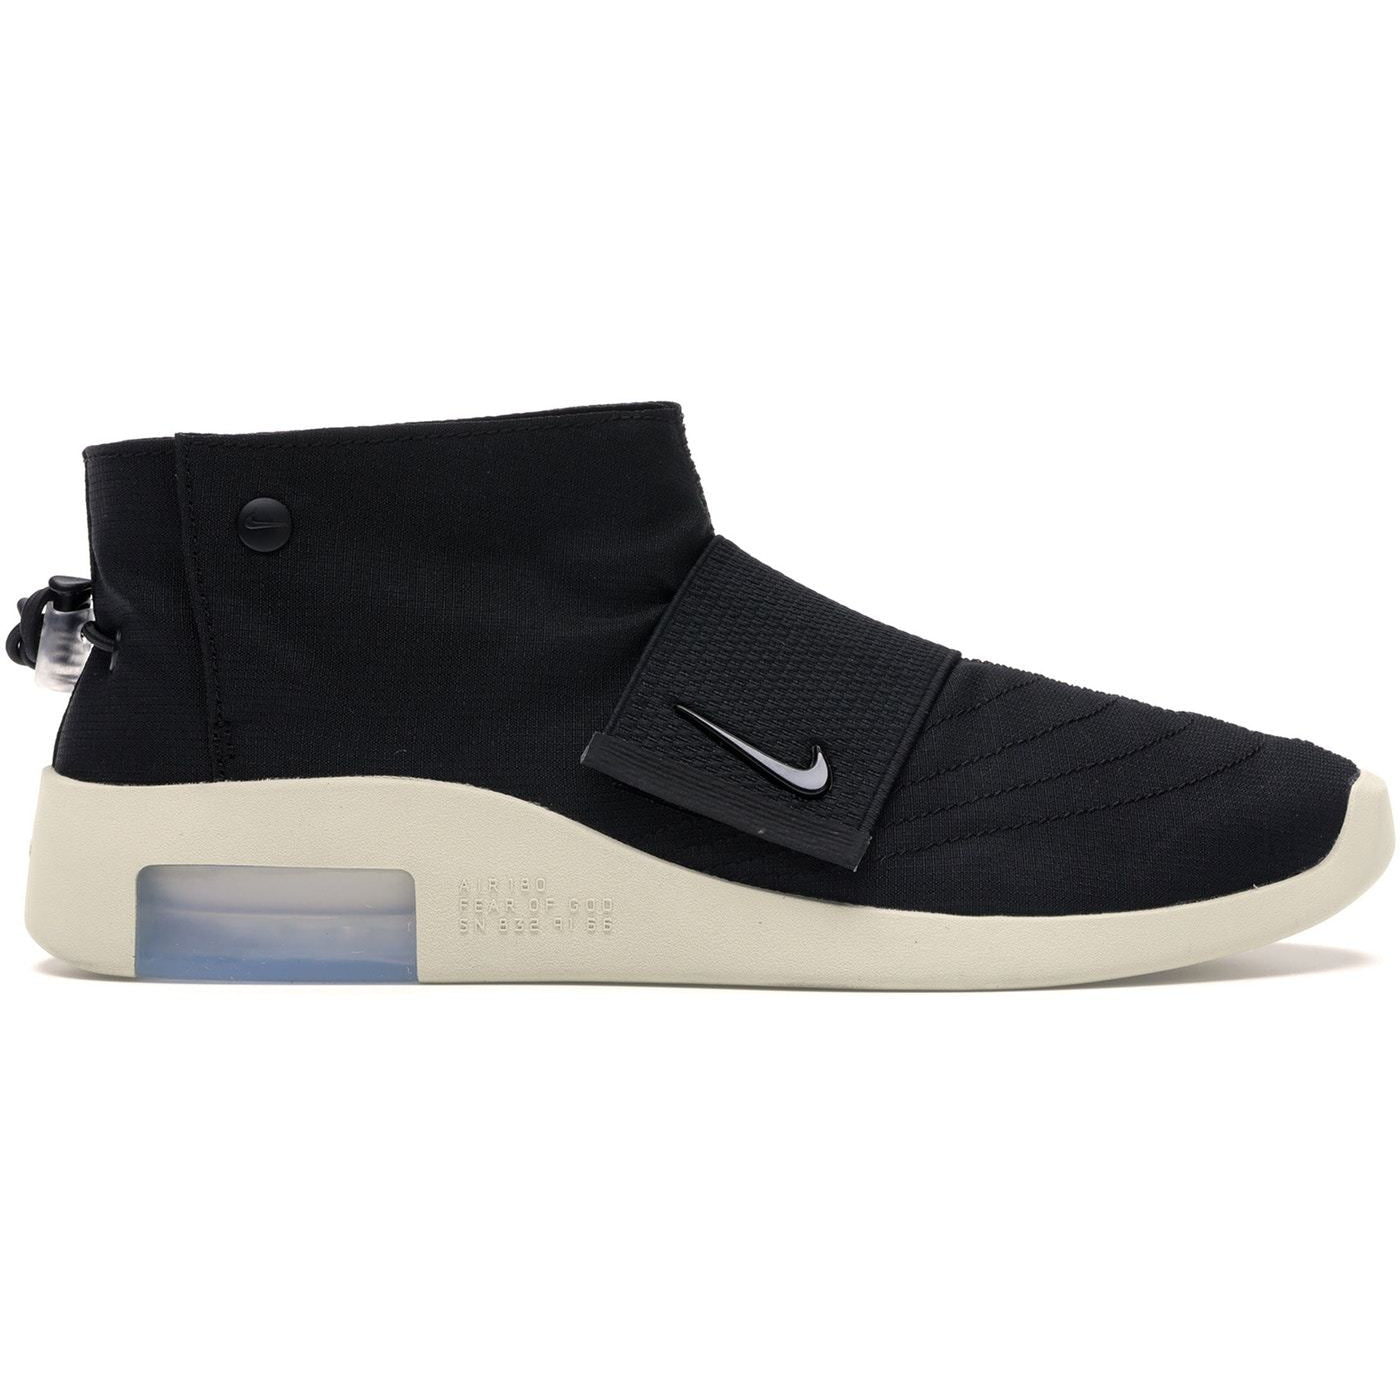 Fear of God “Moc” - Centrall Online